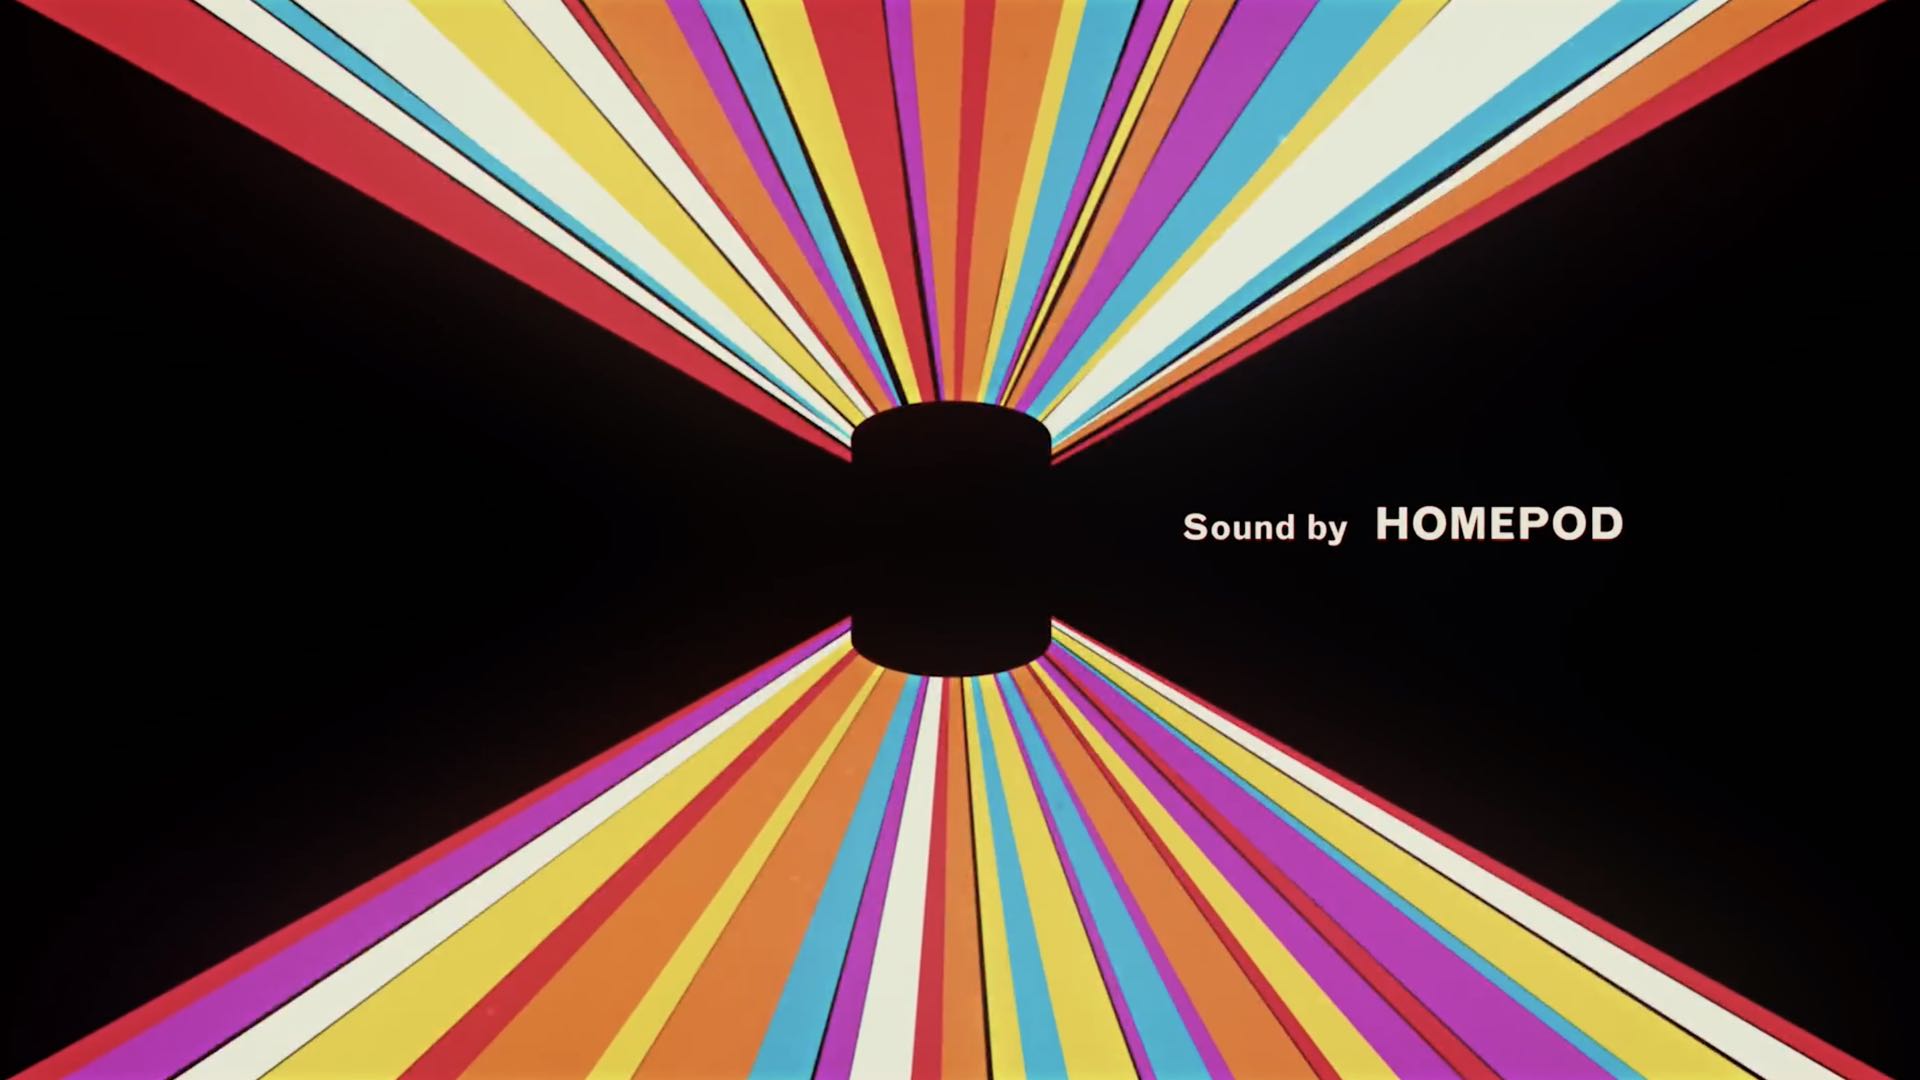 Transfer audio from iPhone to HomePod